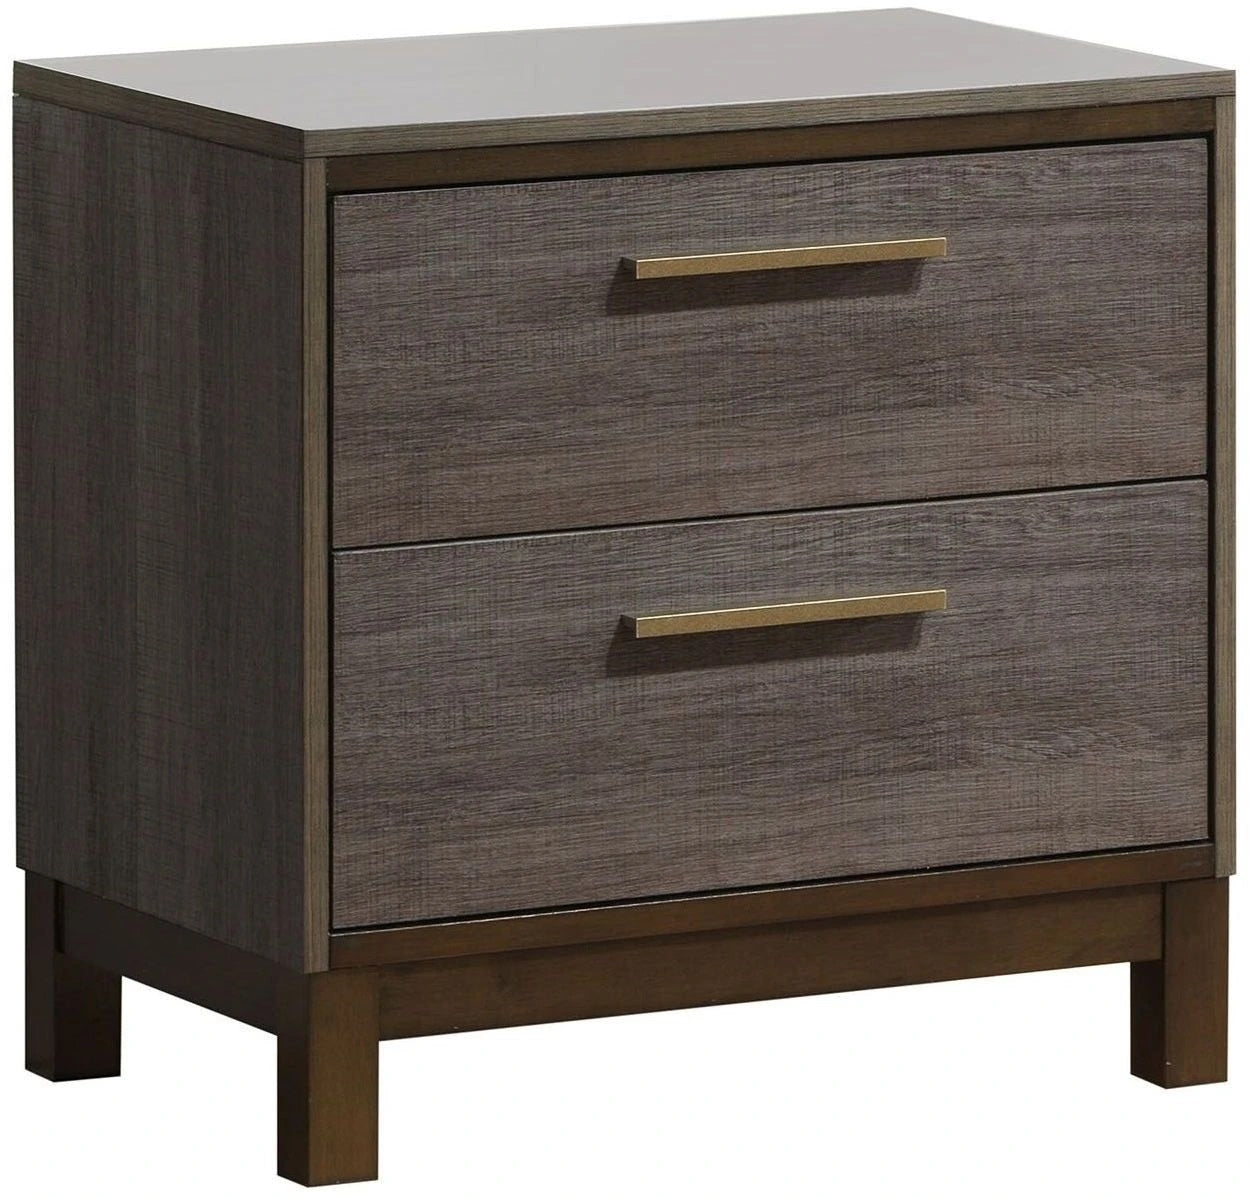 ZNTS Contemporary 1pc Nightstand Two Tone Antique Gray Bedroom Furniture Nightstand Center Metal Glides B01149998